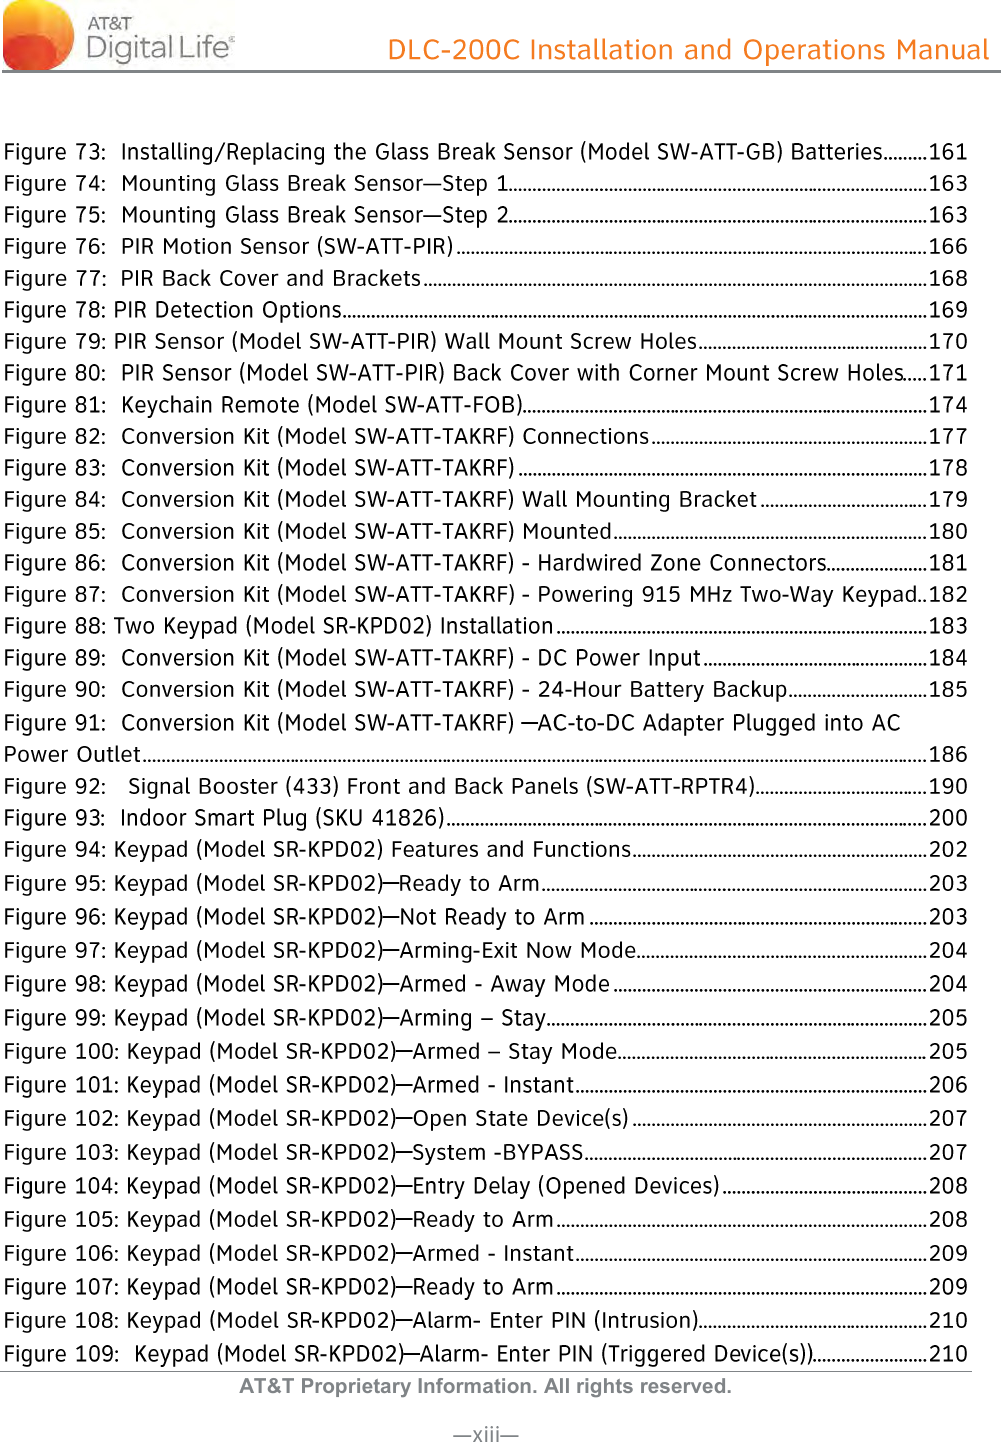   AT&amp;T Proprietary Information. All rights reserved.                   ─    ─ ─ ─ ─ ─ ─ ─ ─ ─ ─ ─ ─ ─ ─ ─ 